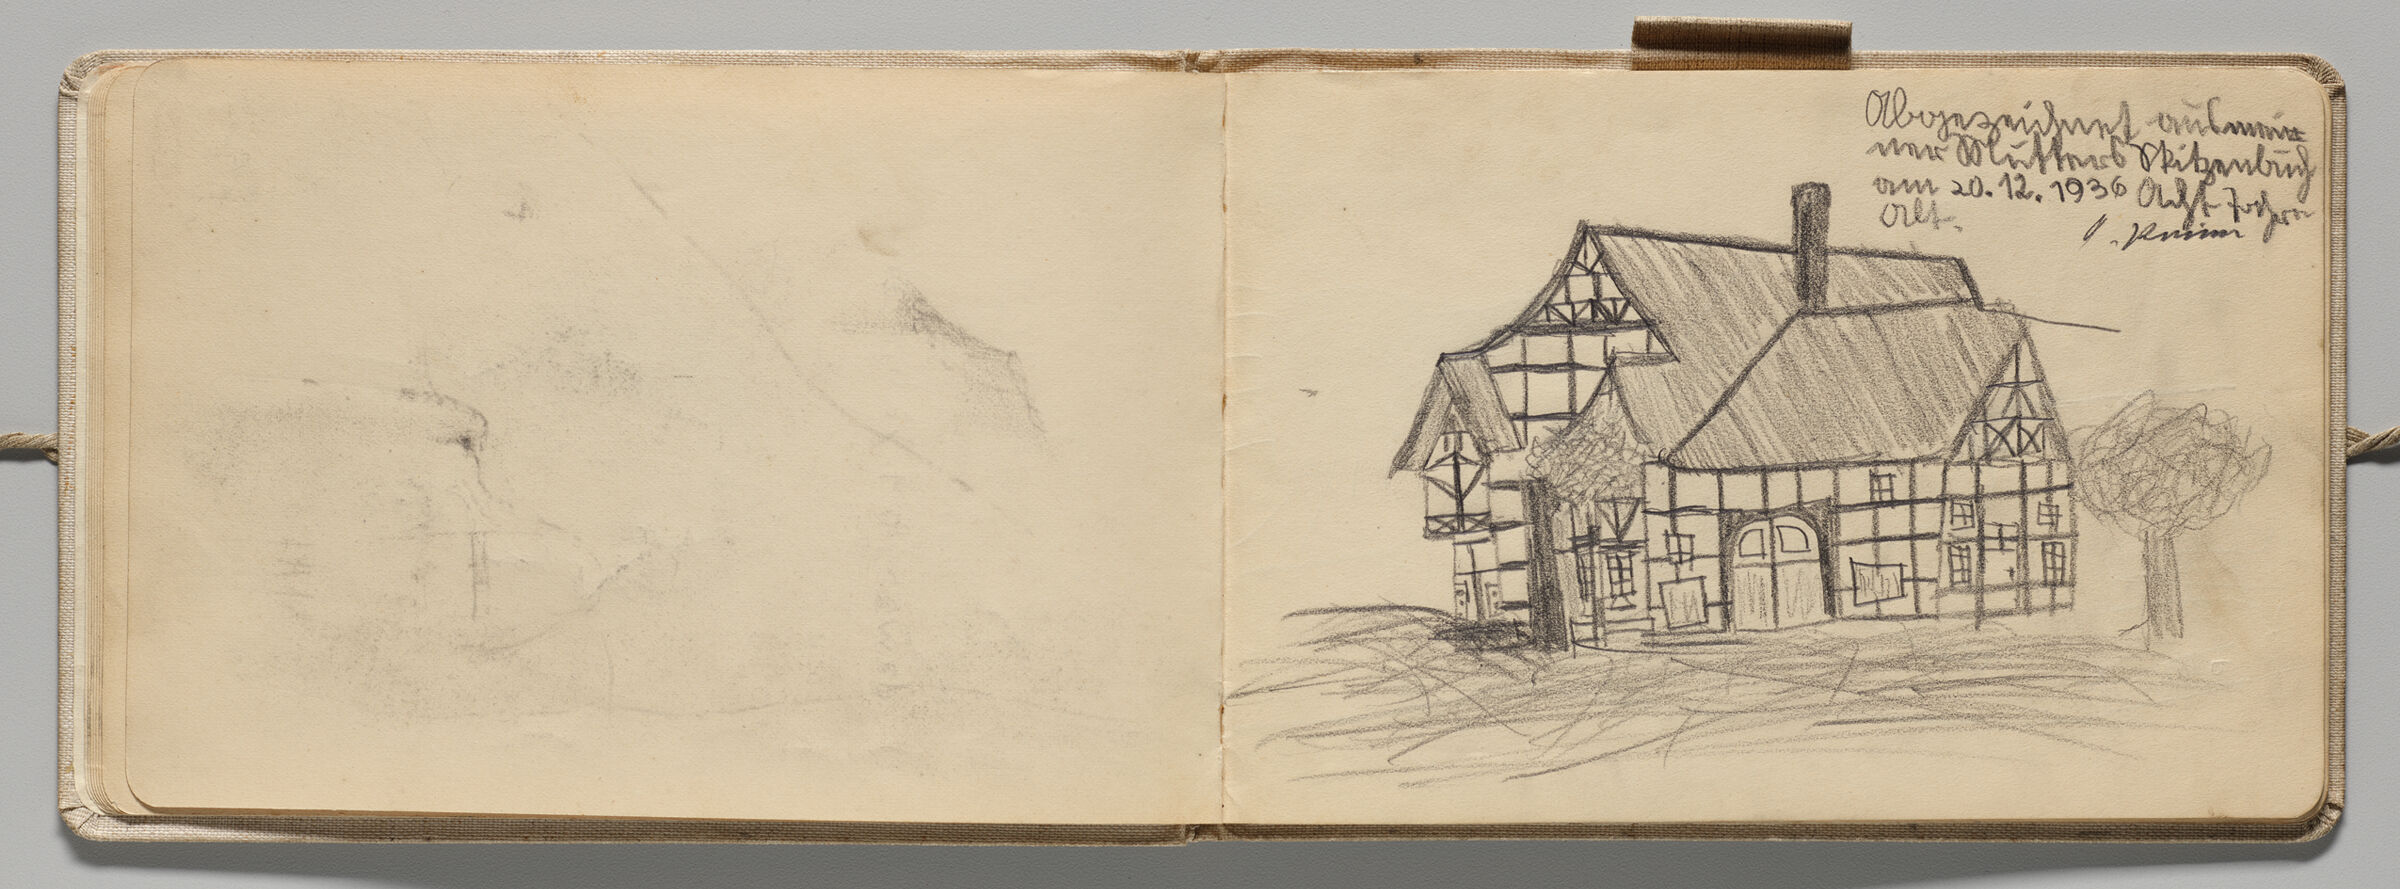 Untitled (Blank With Graphite Smudges, Left Page); Untitled (House With Tree, Right Page)